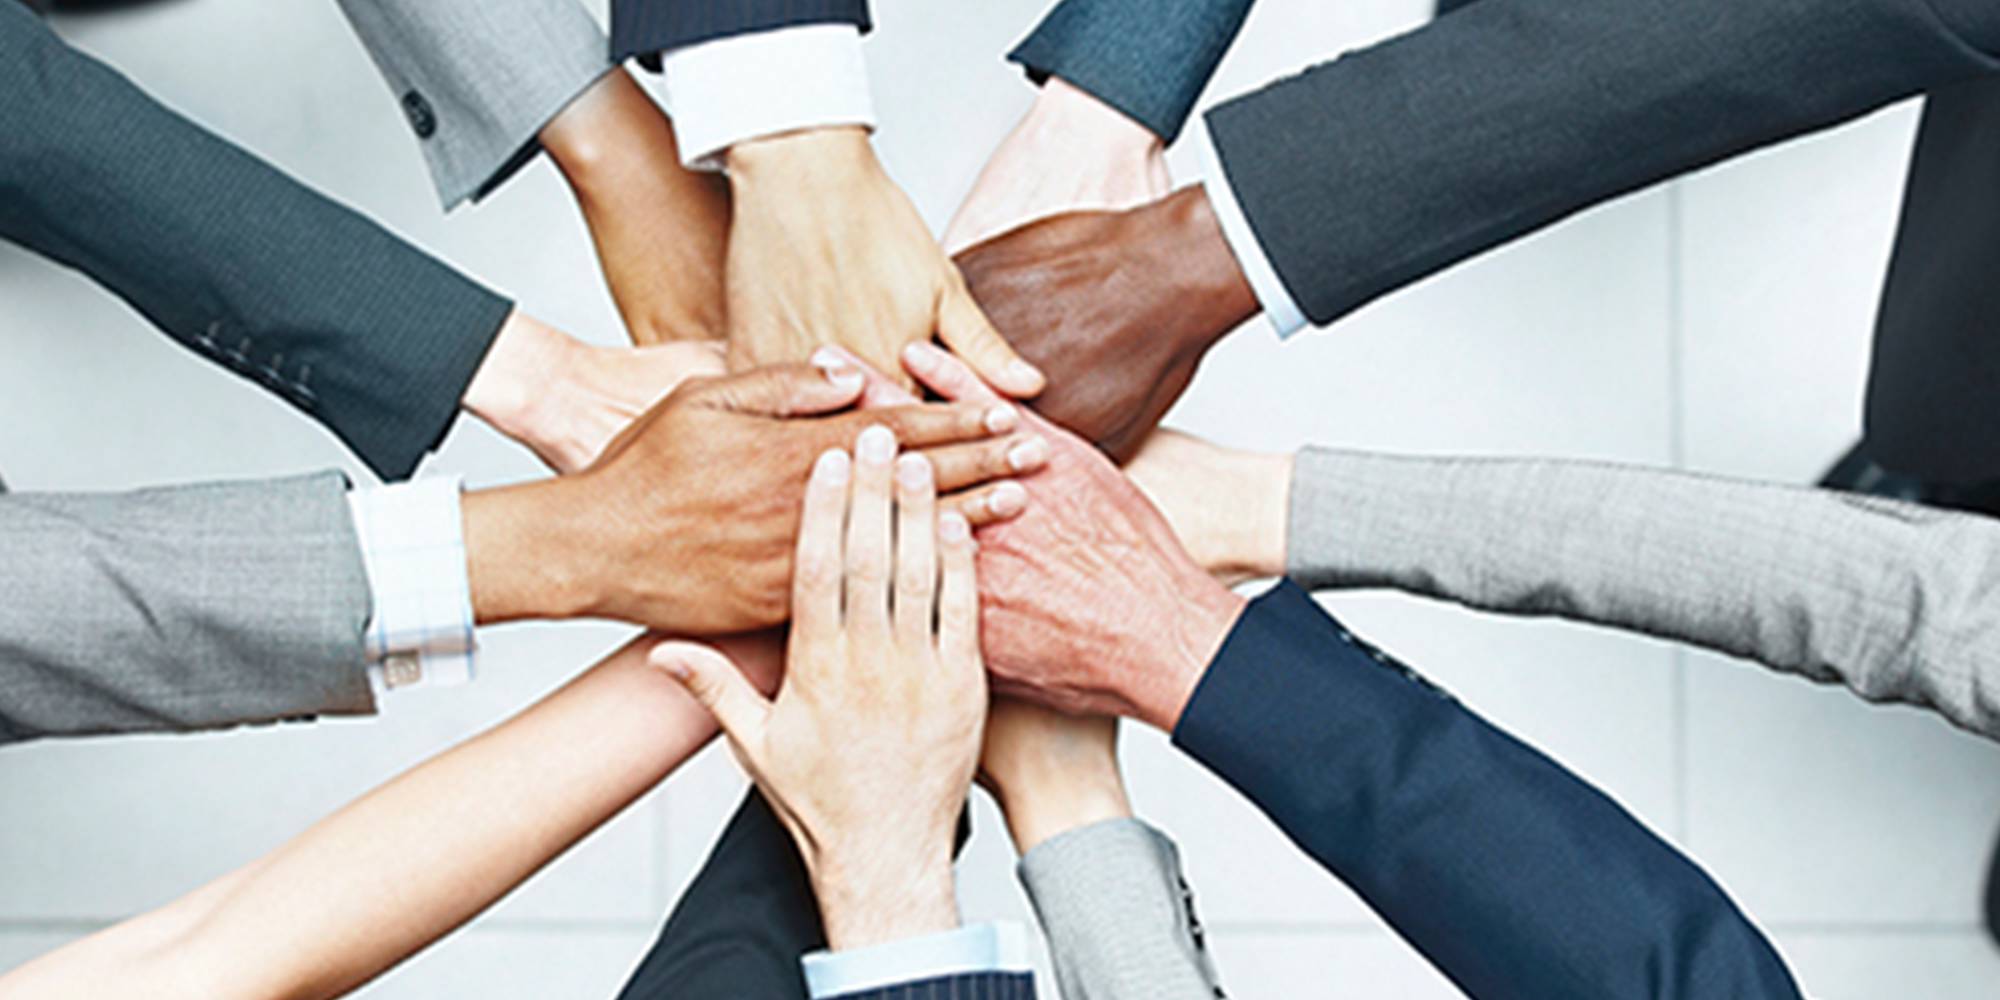 A group of business people putting their hands together in a circle.